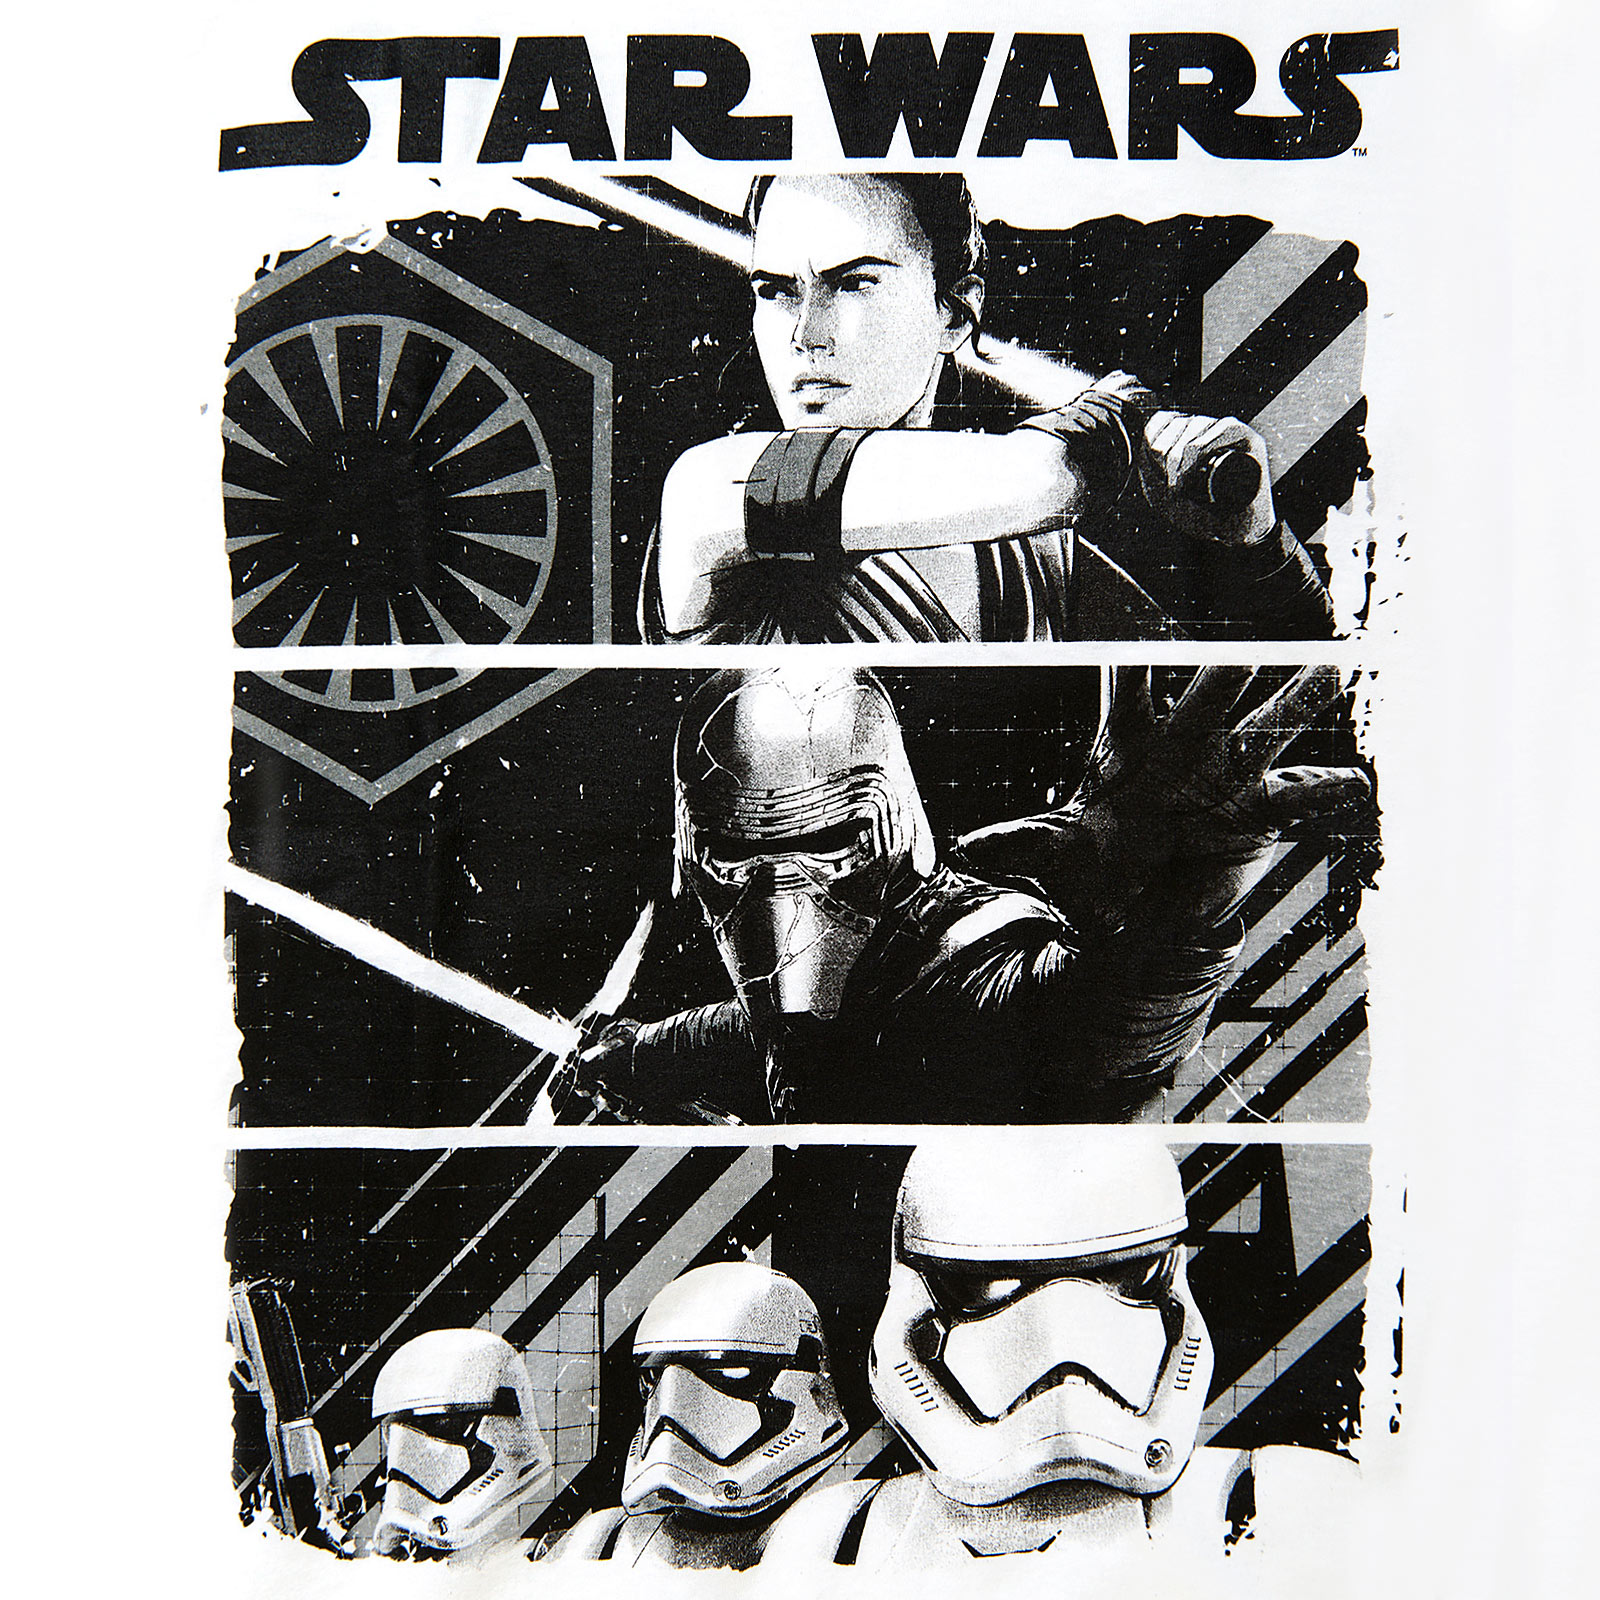 Star Wars - T-shirt Fighting Forces blanc